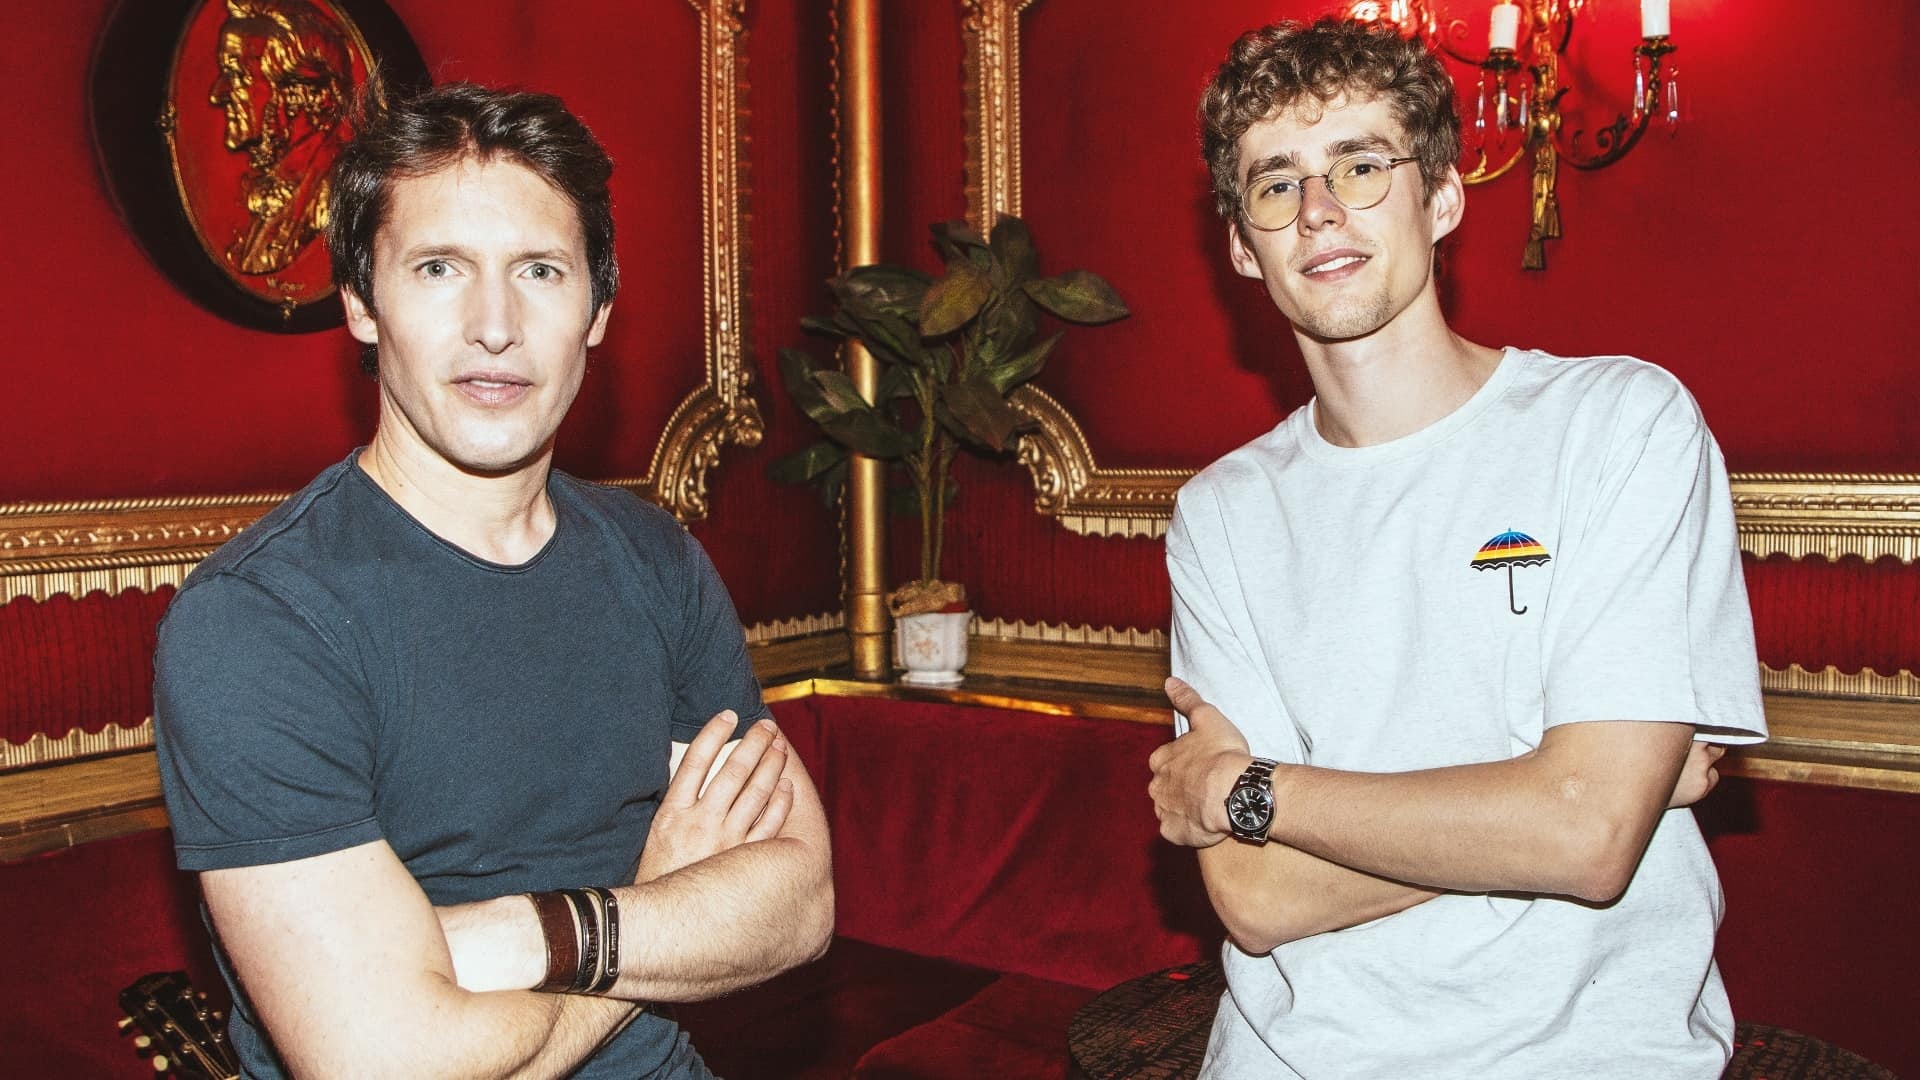 Lost Frequencies, James Blunt collab, Highly anticipated, Melodic drop, 1920x1080 Full HD Desktop